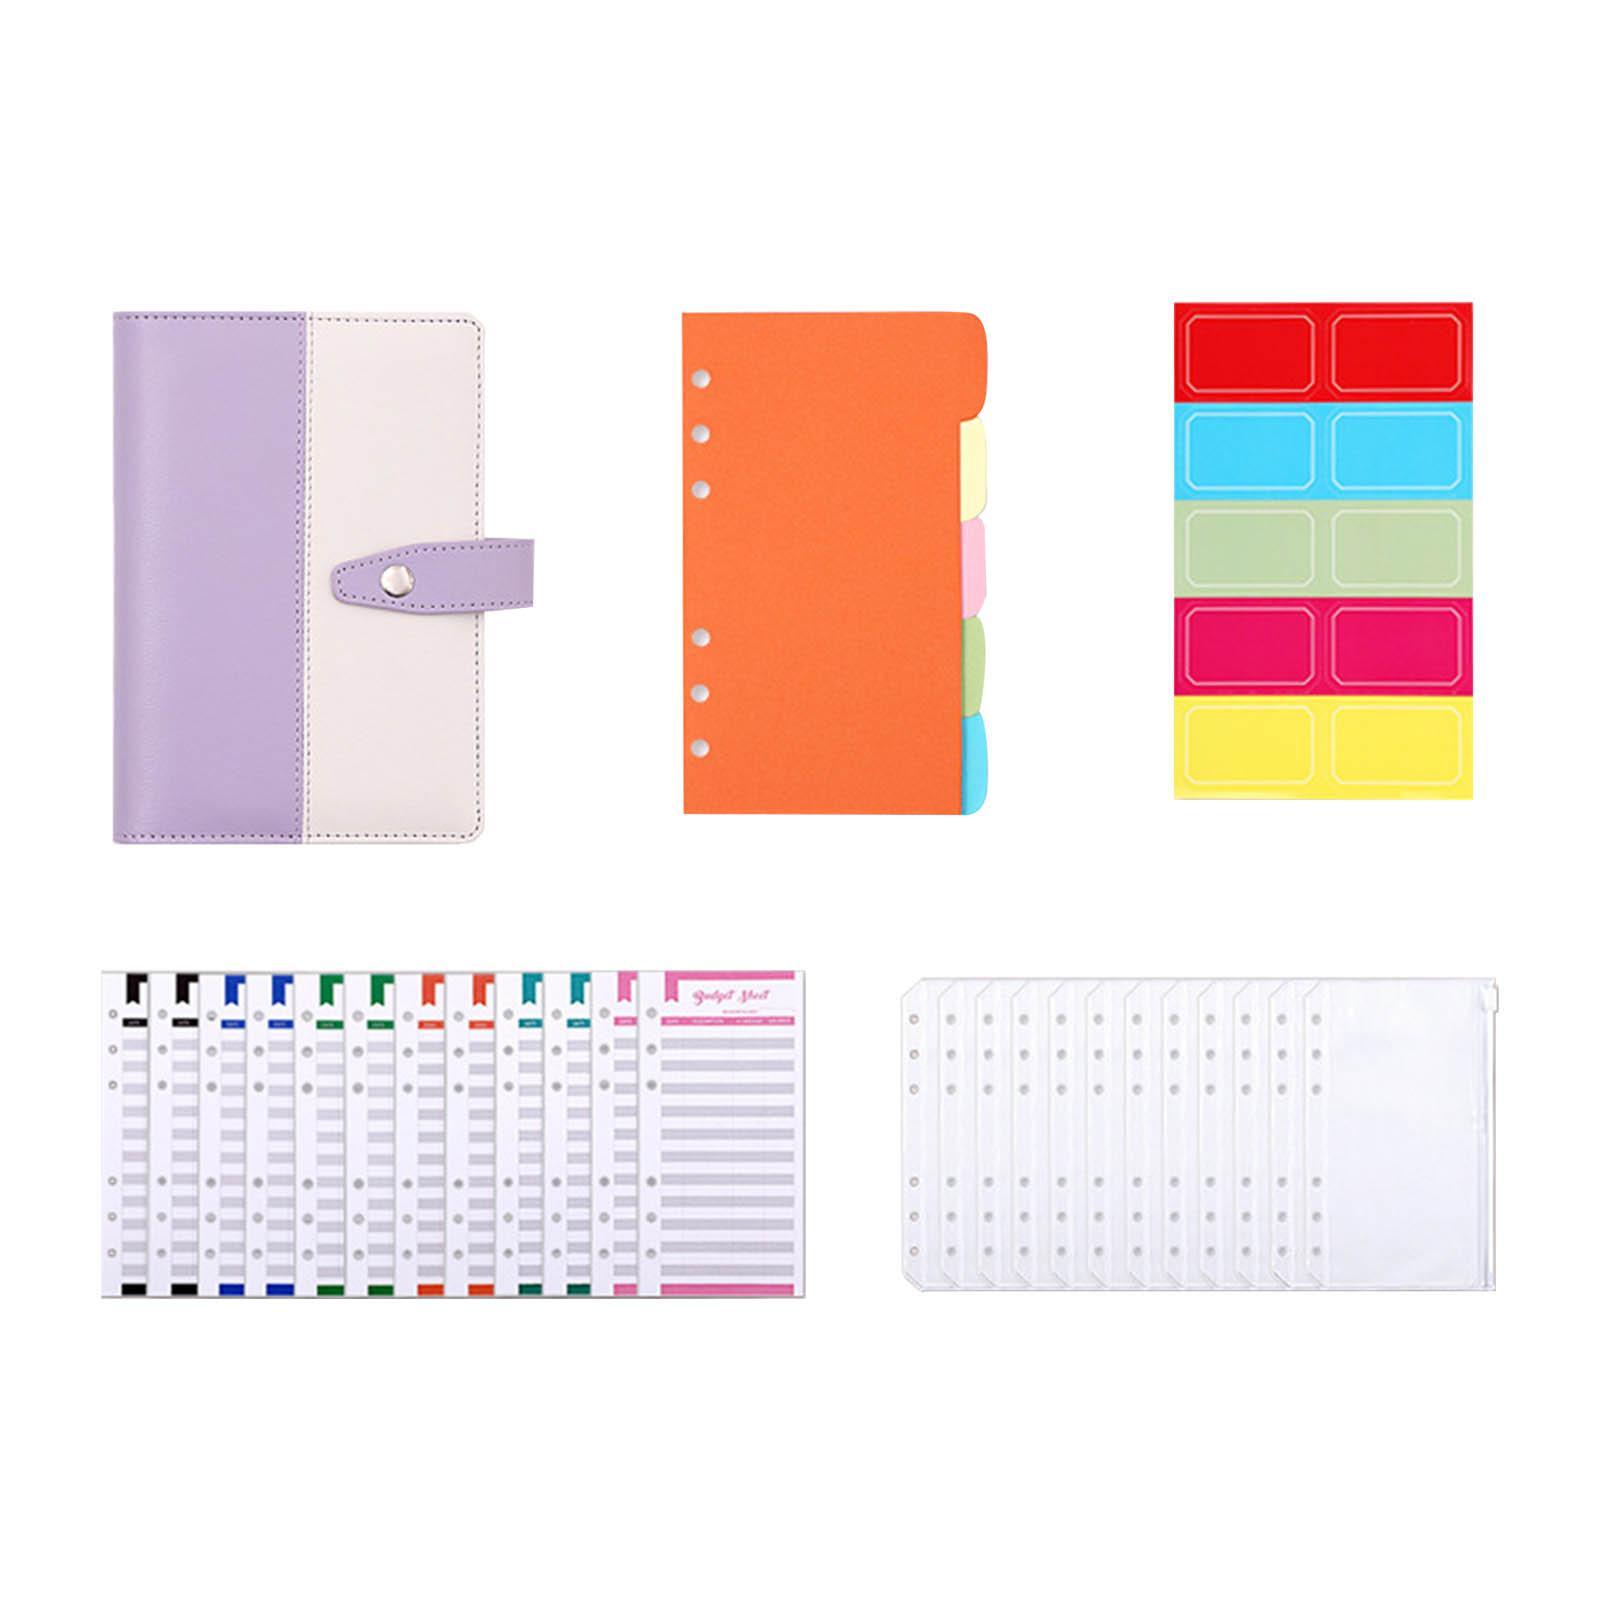 A6 Budget Binder with Zipper Bag for Budgeting, Money Organizer for Cash, Expense Budget Sheet with Label Sticker for 6 Ring Money Saving Binder